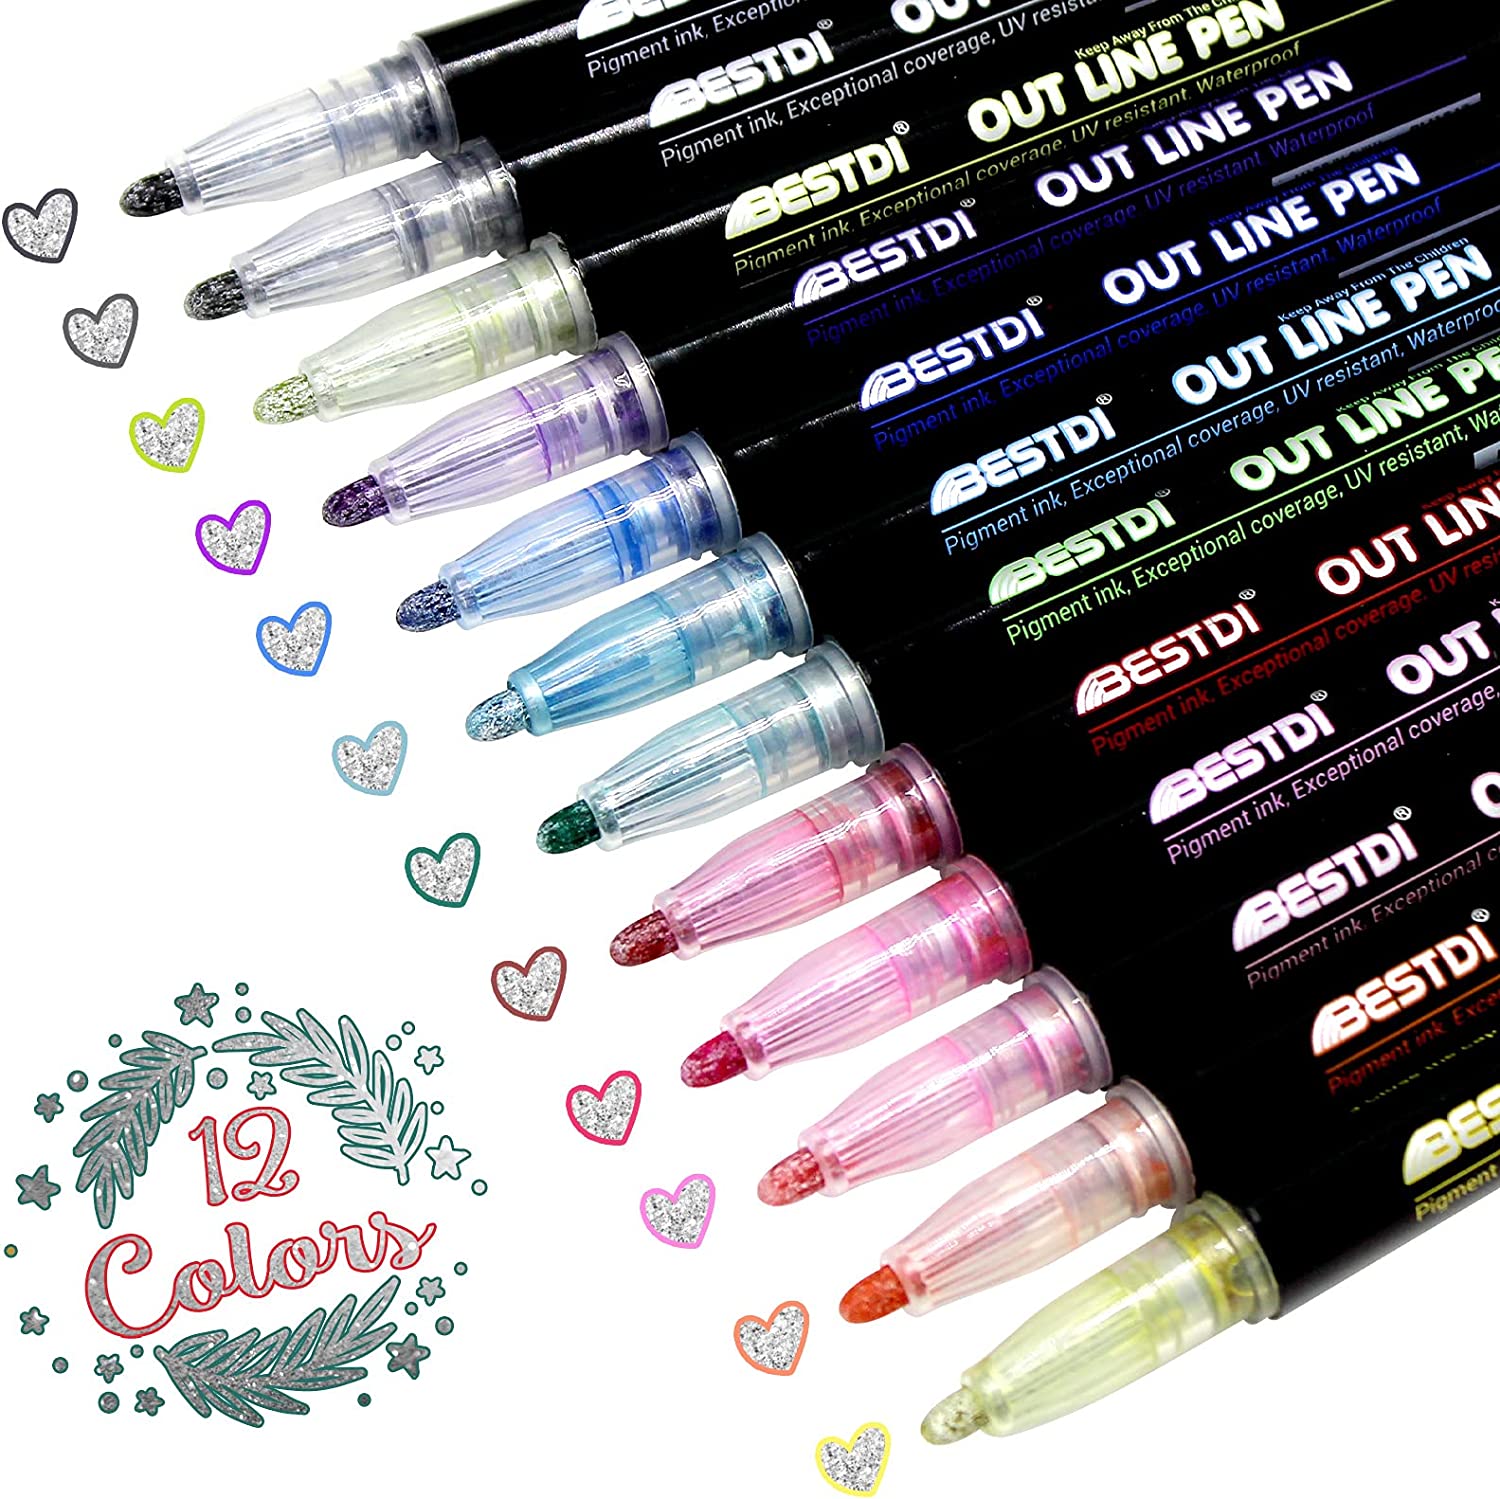 Super Squiggles Shimmer Pens Magic Silver Metallic Self Outline